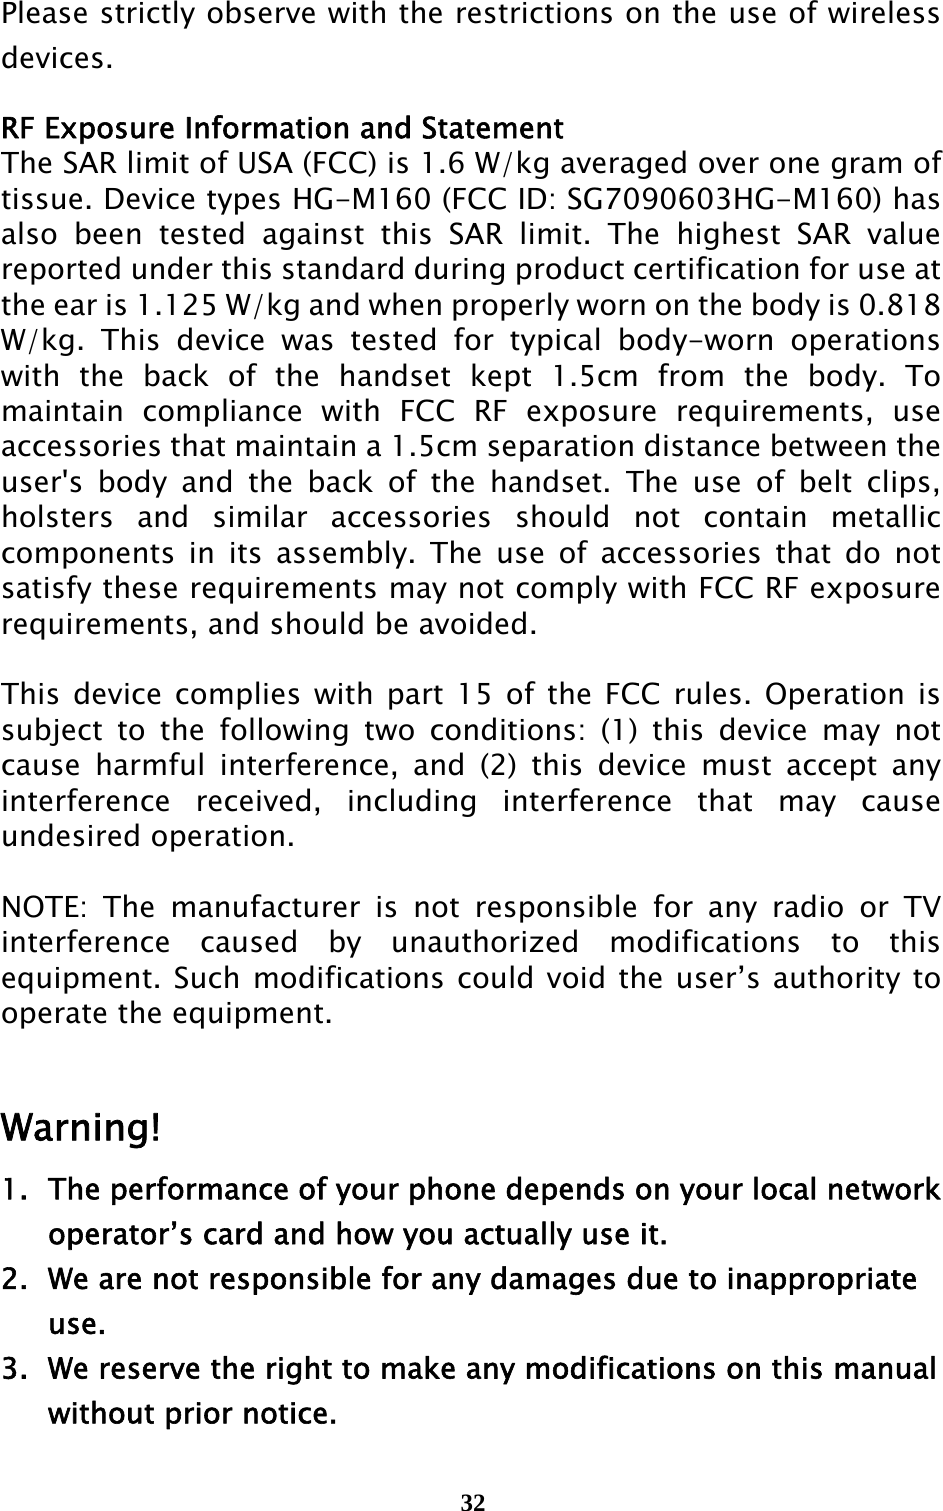  32 Please strictly observe with the restrictions on the use of wireless devices.  RF Exposure Information and Statement   The SAR limit of USA (FCC) is 1.6 W/kg averaged over one gram of tissue. Device types HG-M160 (FCC ID: SG7090603HG-M160) has also been tested against this SAR limit. The highest SAR value reported under this standard during product certification for use at the ear is 1.125 W/kg and when properly worn on the body is 0.818 W/kg. This device was tested for typical body-worn operations with the back of the handset kept 1.5cm from the body. To maintain compliance with FCC RF exposure requirements, use accessories that maintain a 1.5cm separation distance between the user&apos;s body and the back of the handset. The use of belt clips, holsters and similar accessories should not contain metallic components in its assembly. The use of accessories that do not satisfy these requirements may not comply with FCC RF exposure requirements, and should be avoided.  This device complies with part 15 of the FCC rules. Operation is subject to the following two conditions: (1) this device may not cause harmful interference, and (2) this device must accept any interference received, including interference that may cause undesired operation.  NOTE: The manufacturer is not responsible for any radio or TV interference caused by unauthorized modifications to this equipment. Such modifications could void the user’s authority to operate the equipment.  Warning! 1.  The performance of your phone depends on your local network     operator’s card and how you actually use it. 2.   We are not responsible for any damages due to inappropriate    use.  3.   We reserve the right to make any modifications on this manual     without prior notice. 